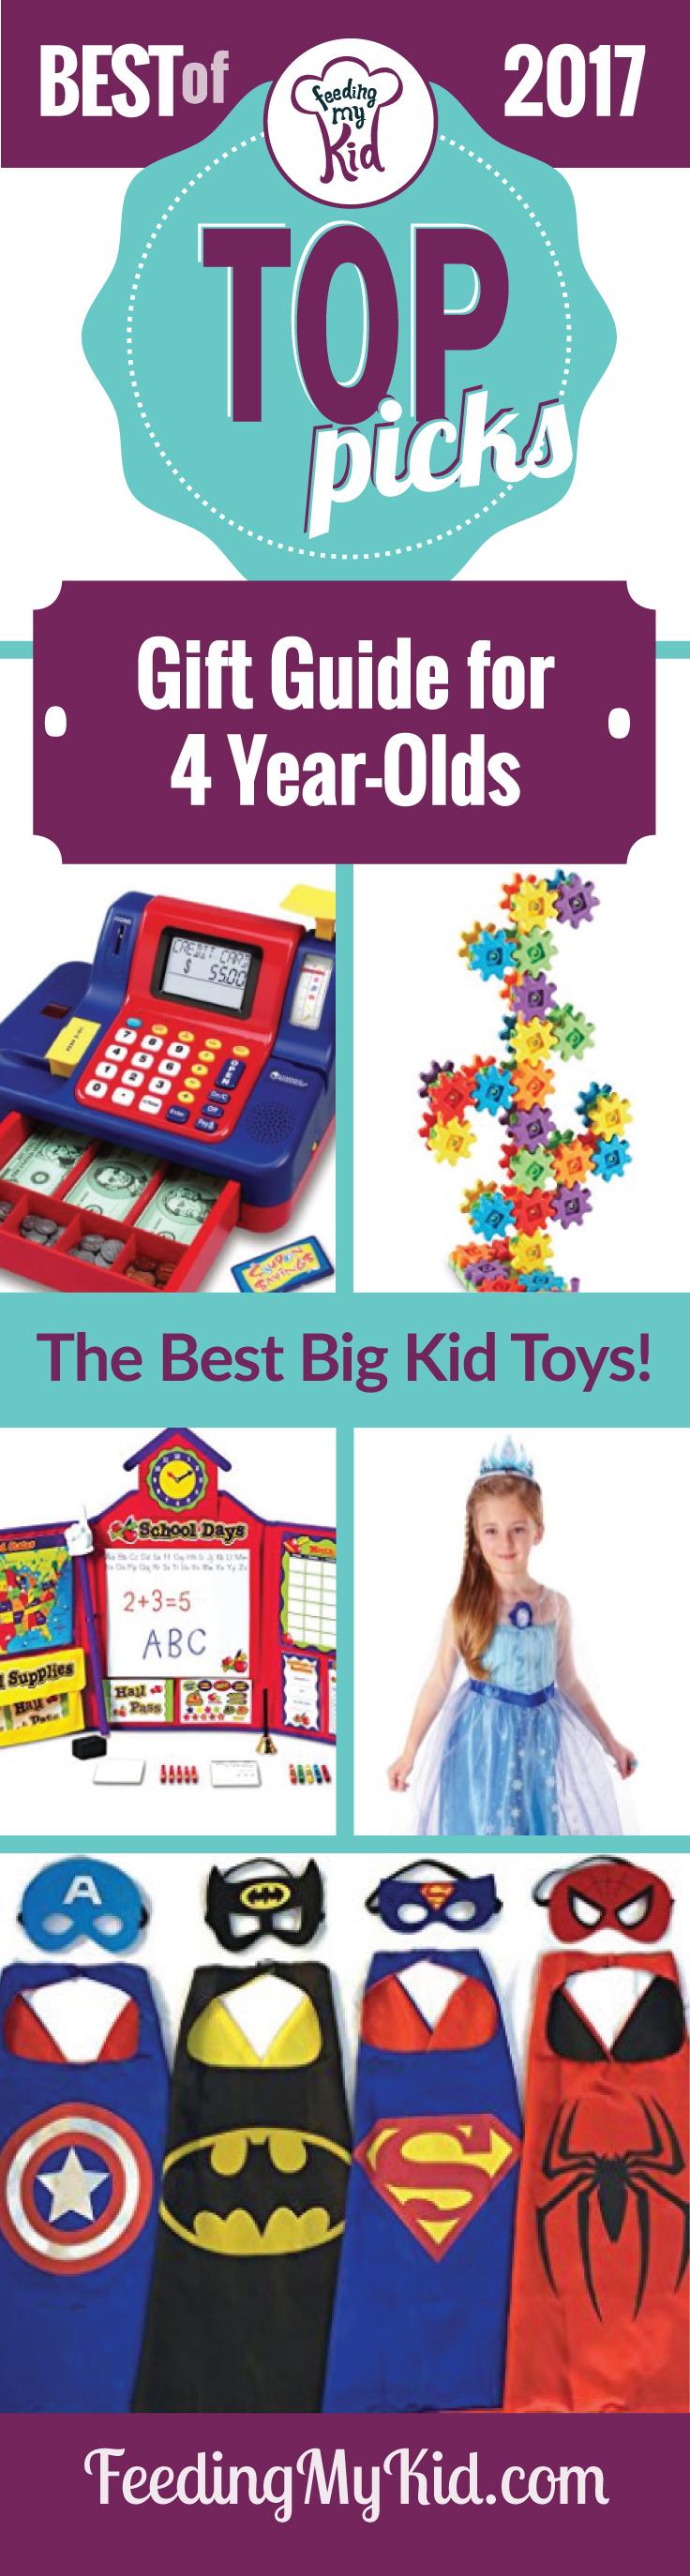 Big kids want big kid toys! Check out our ultimate list of the best toys for 4 year olds. They'll love to play with these.